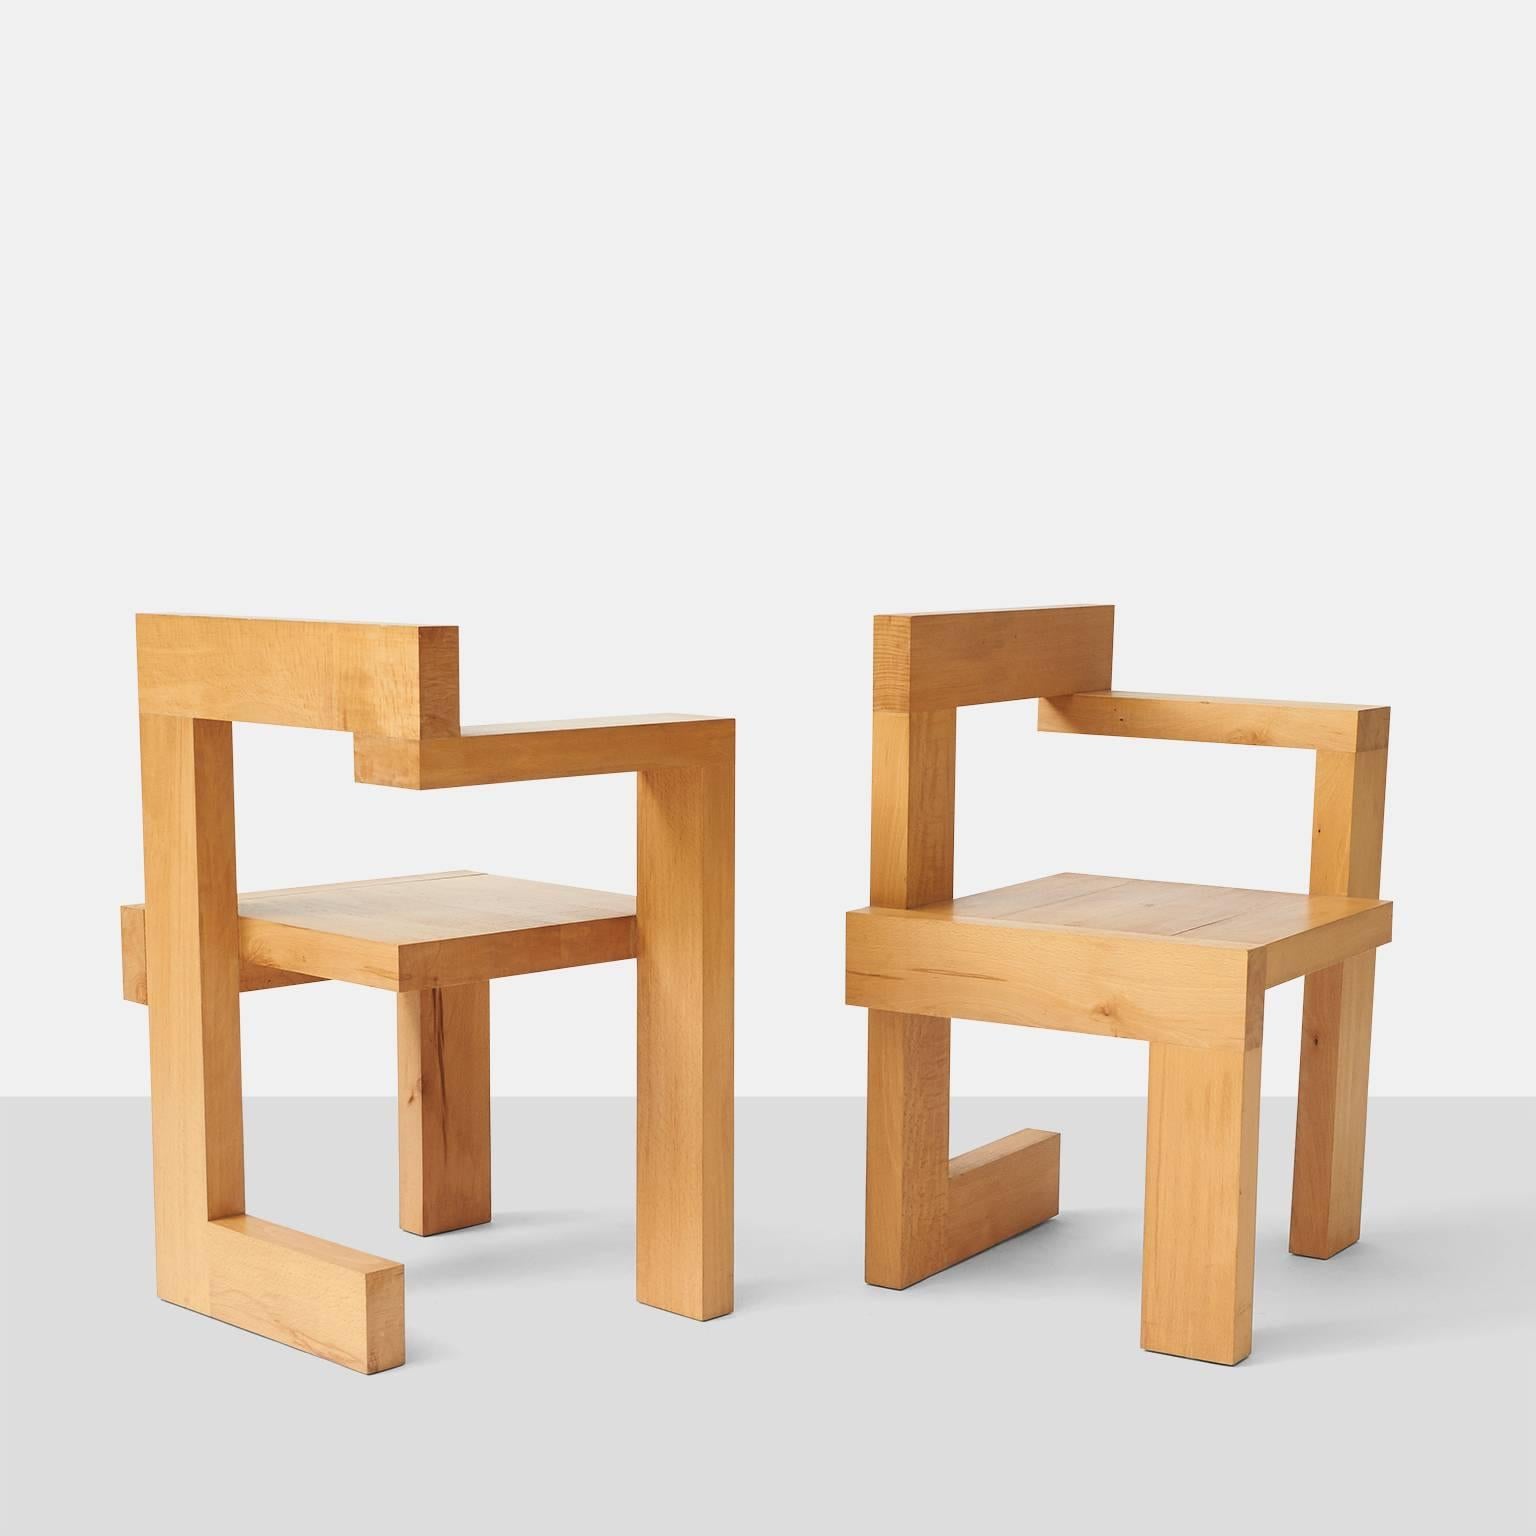 A pair of chairs in oak by Gerrit Rietveld, one with a left arm and the other with a right arm.  The chairs were designed  in 1963 for the Steltman Jewelry store in the Hague. 